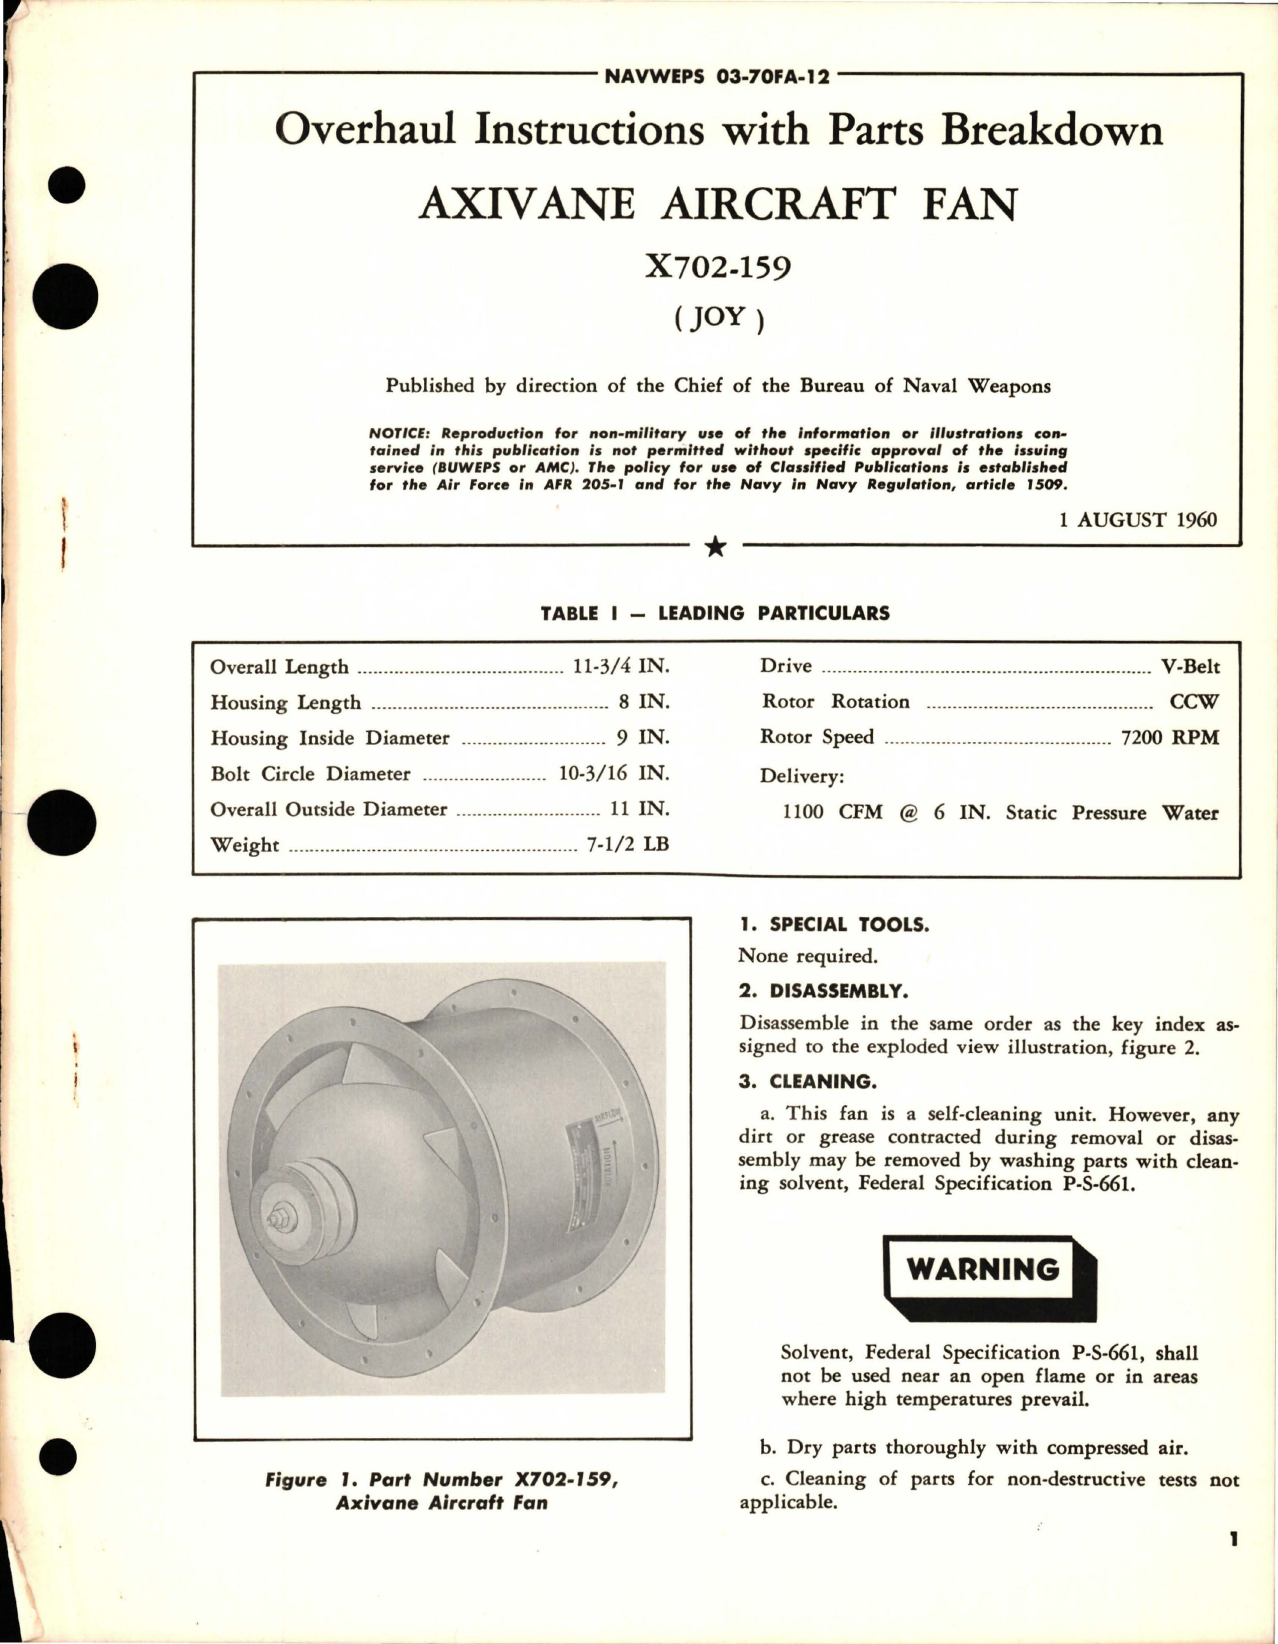 Sample page 1 from AirCorps Library document: Overhaul Instructions with Parts Breakdown for Axivane Aircraft Fan - X702-159 